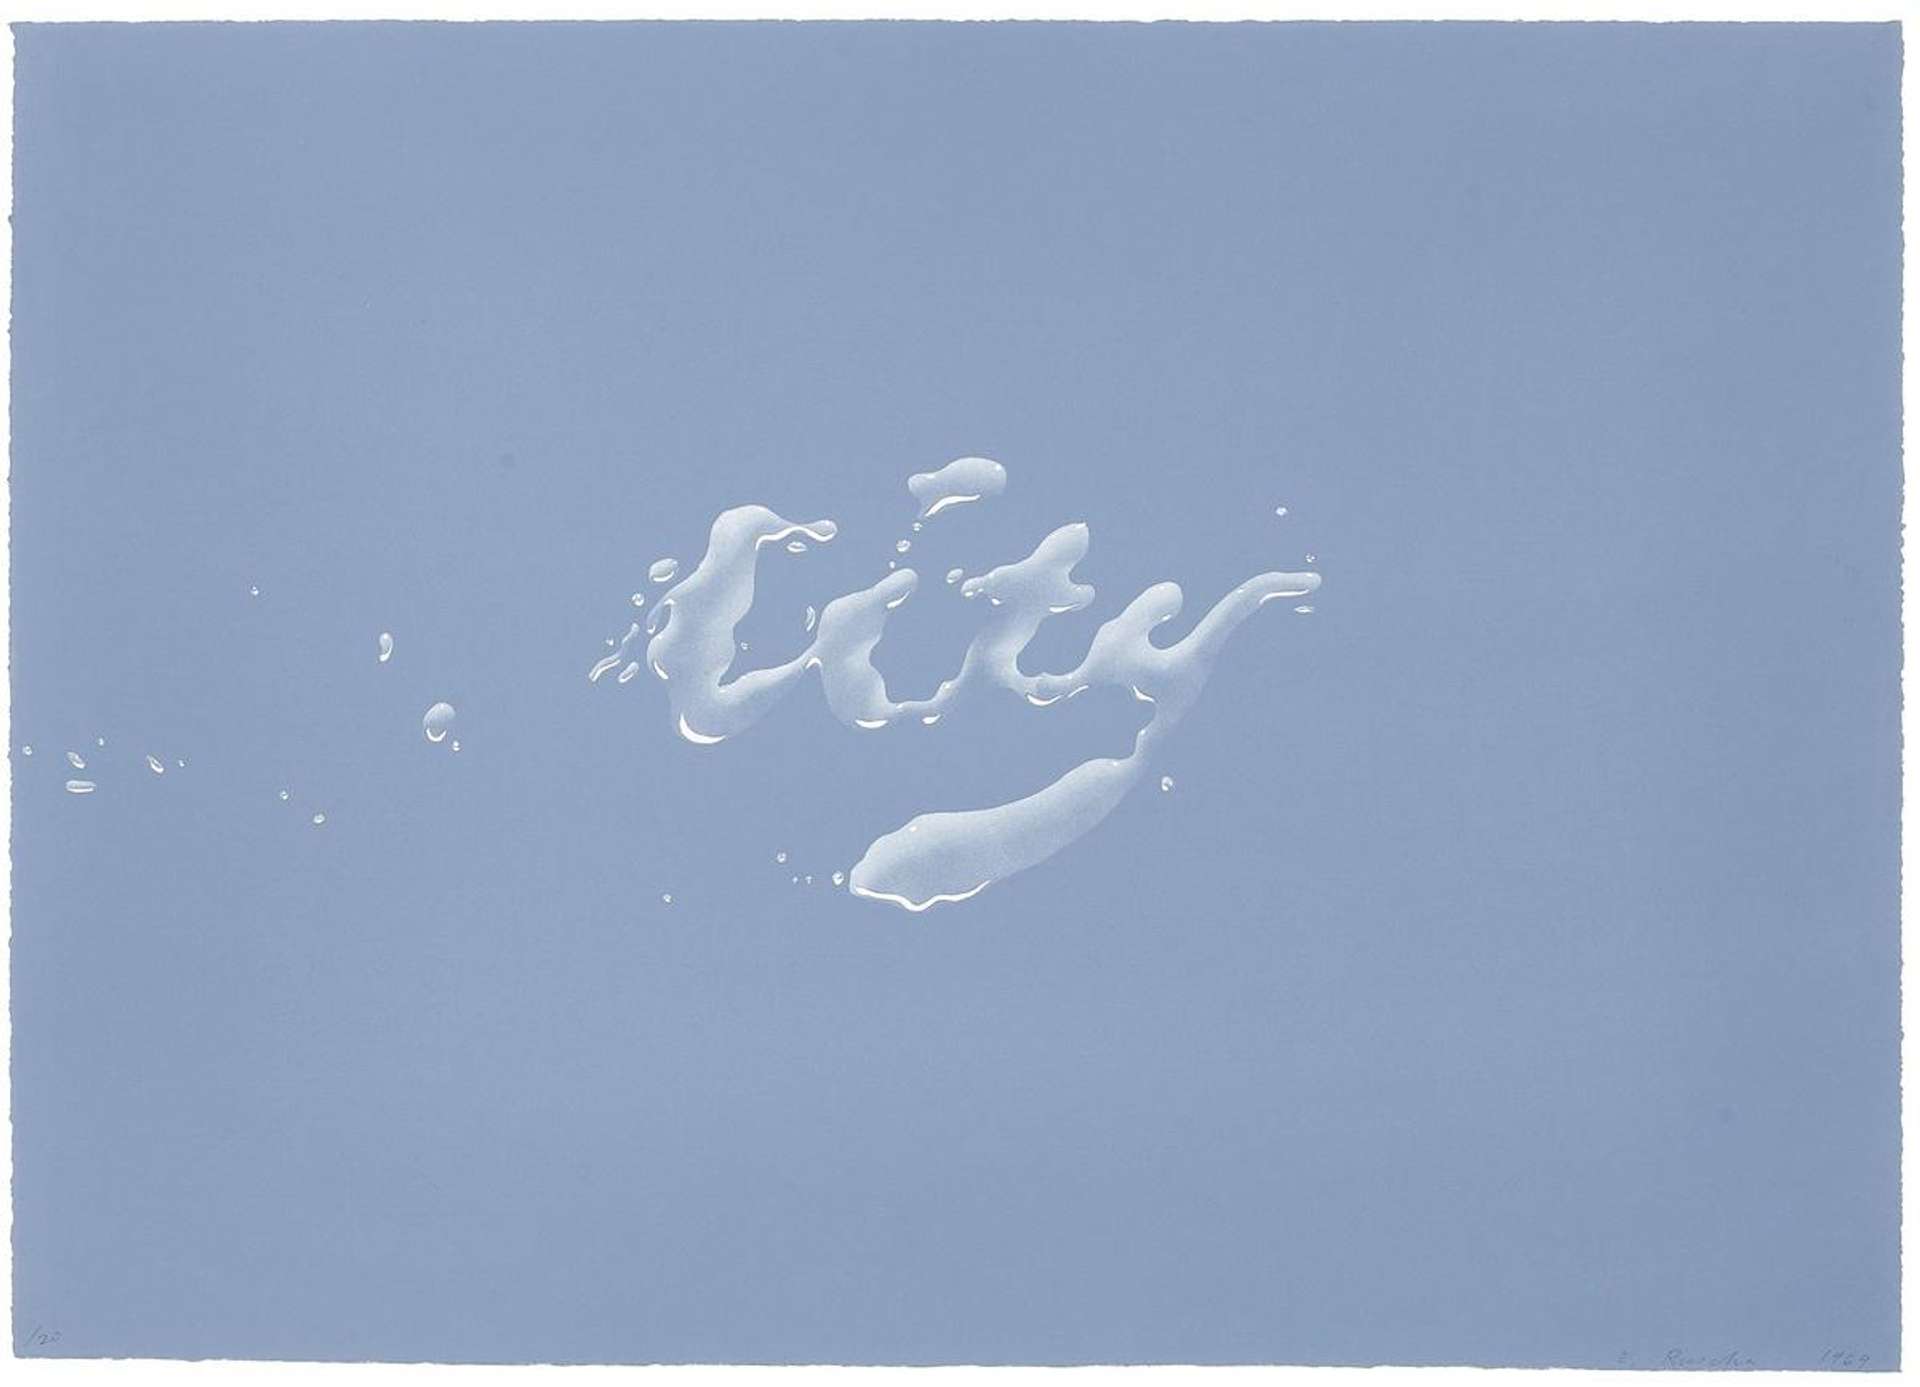 Lithograph by Ed Ruscha depicting the word 'city', with lettering which resembles splashes of water. The word is a light blue, set against a darker, greyish-blue background.